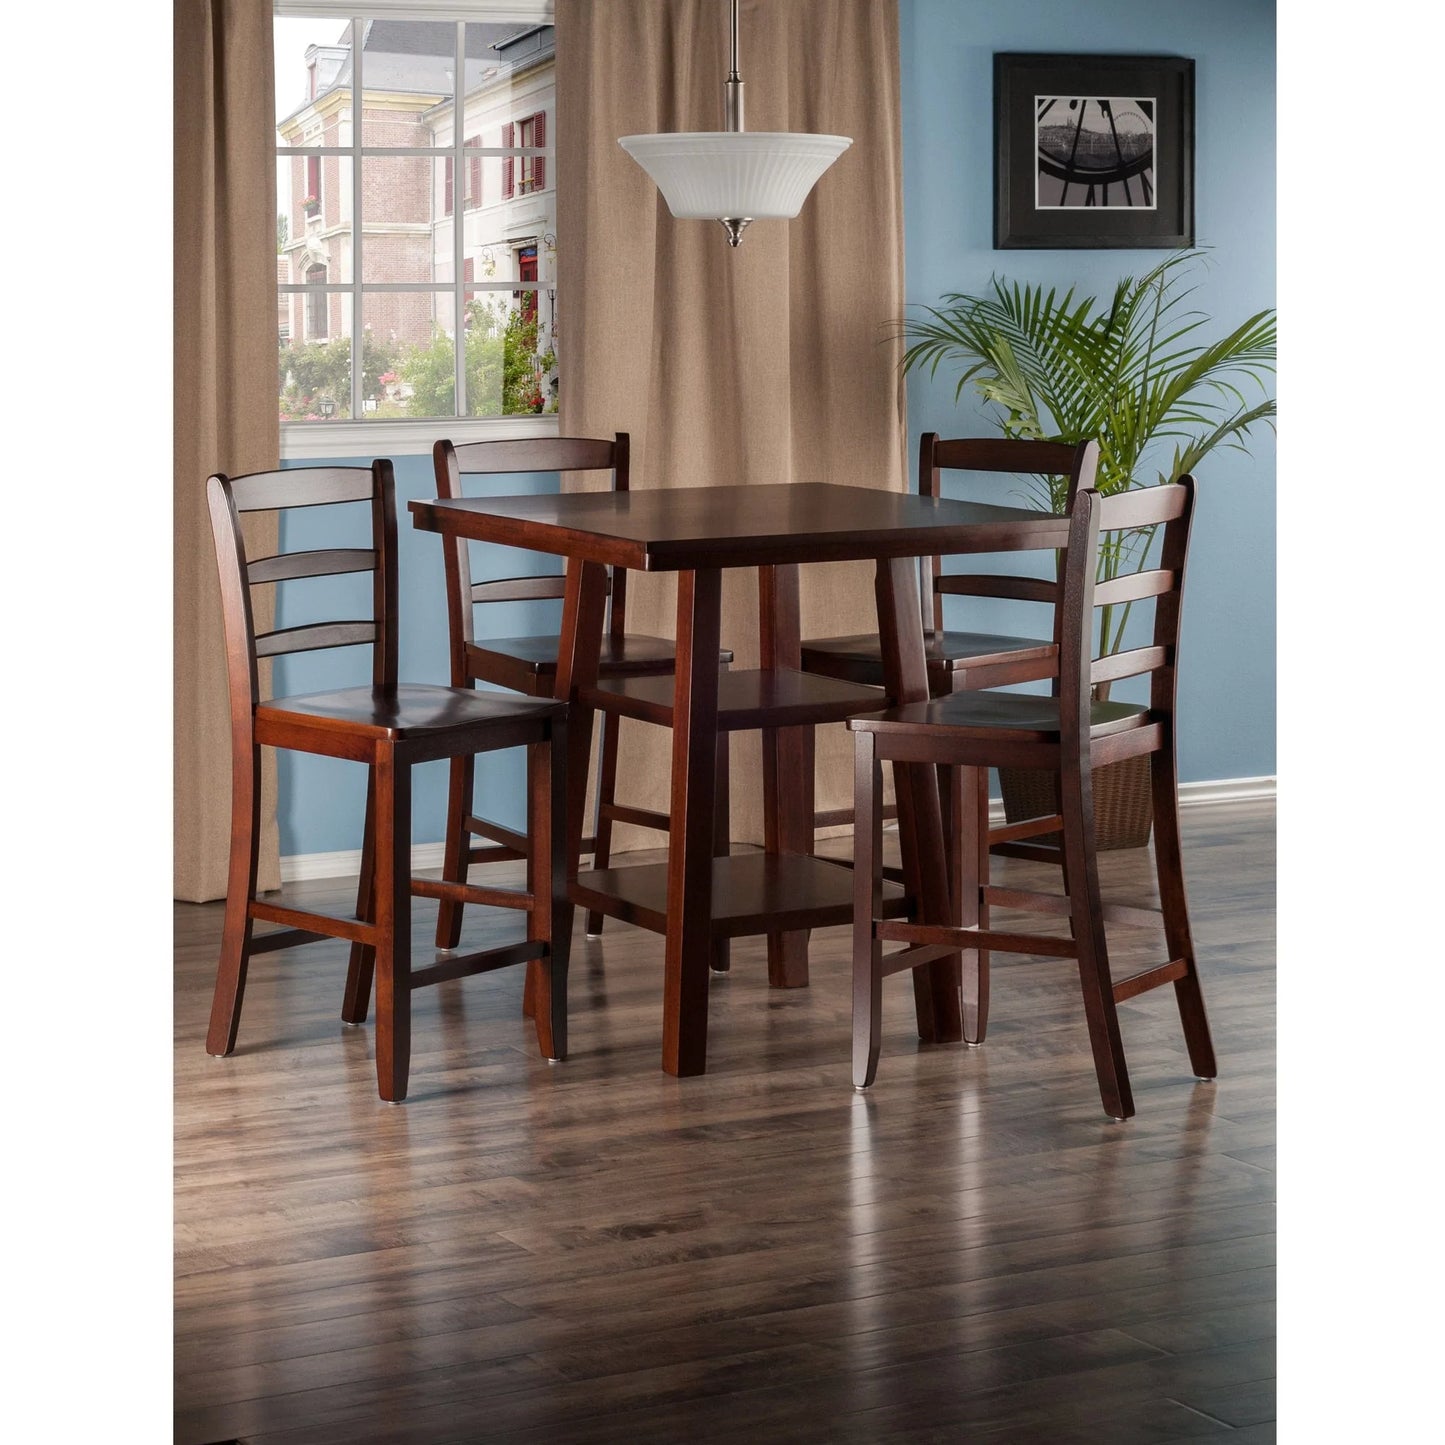 WINSOME Pub Table Set Orlando 5-Pc High Table with Ladder-back Counter Stools, Walnut